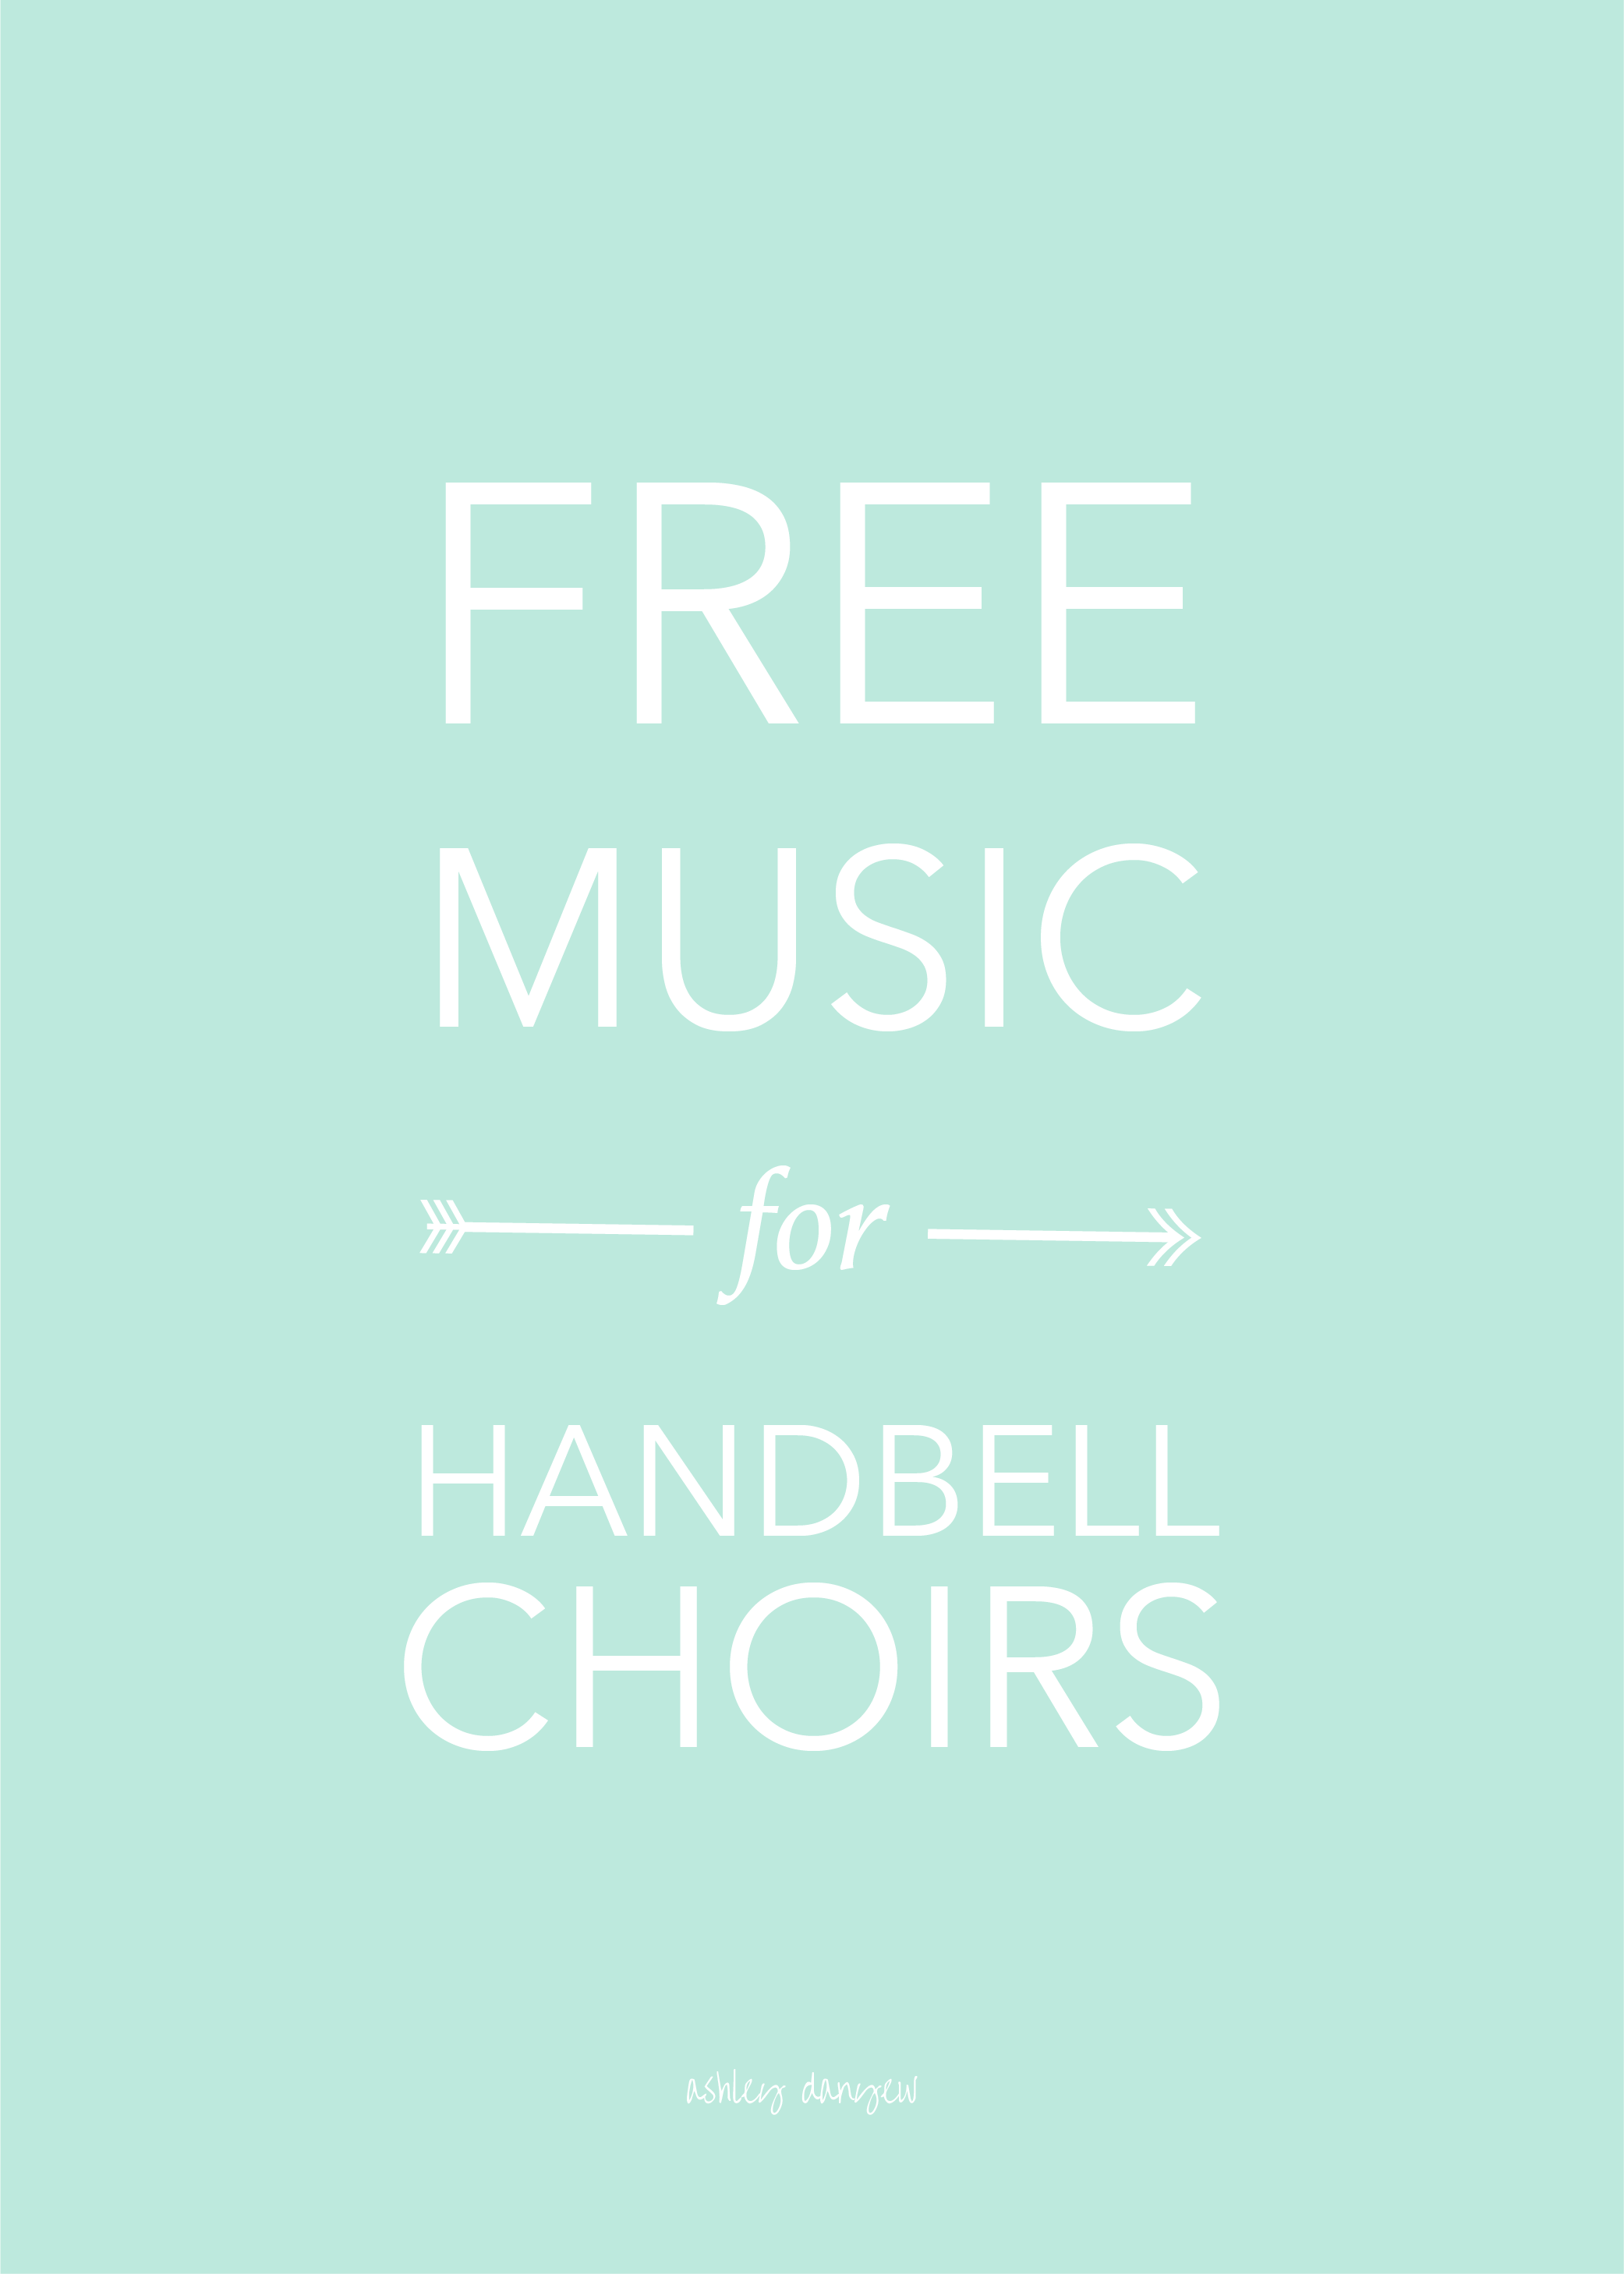 Free Music for Handbell Choirs-01.png